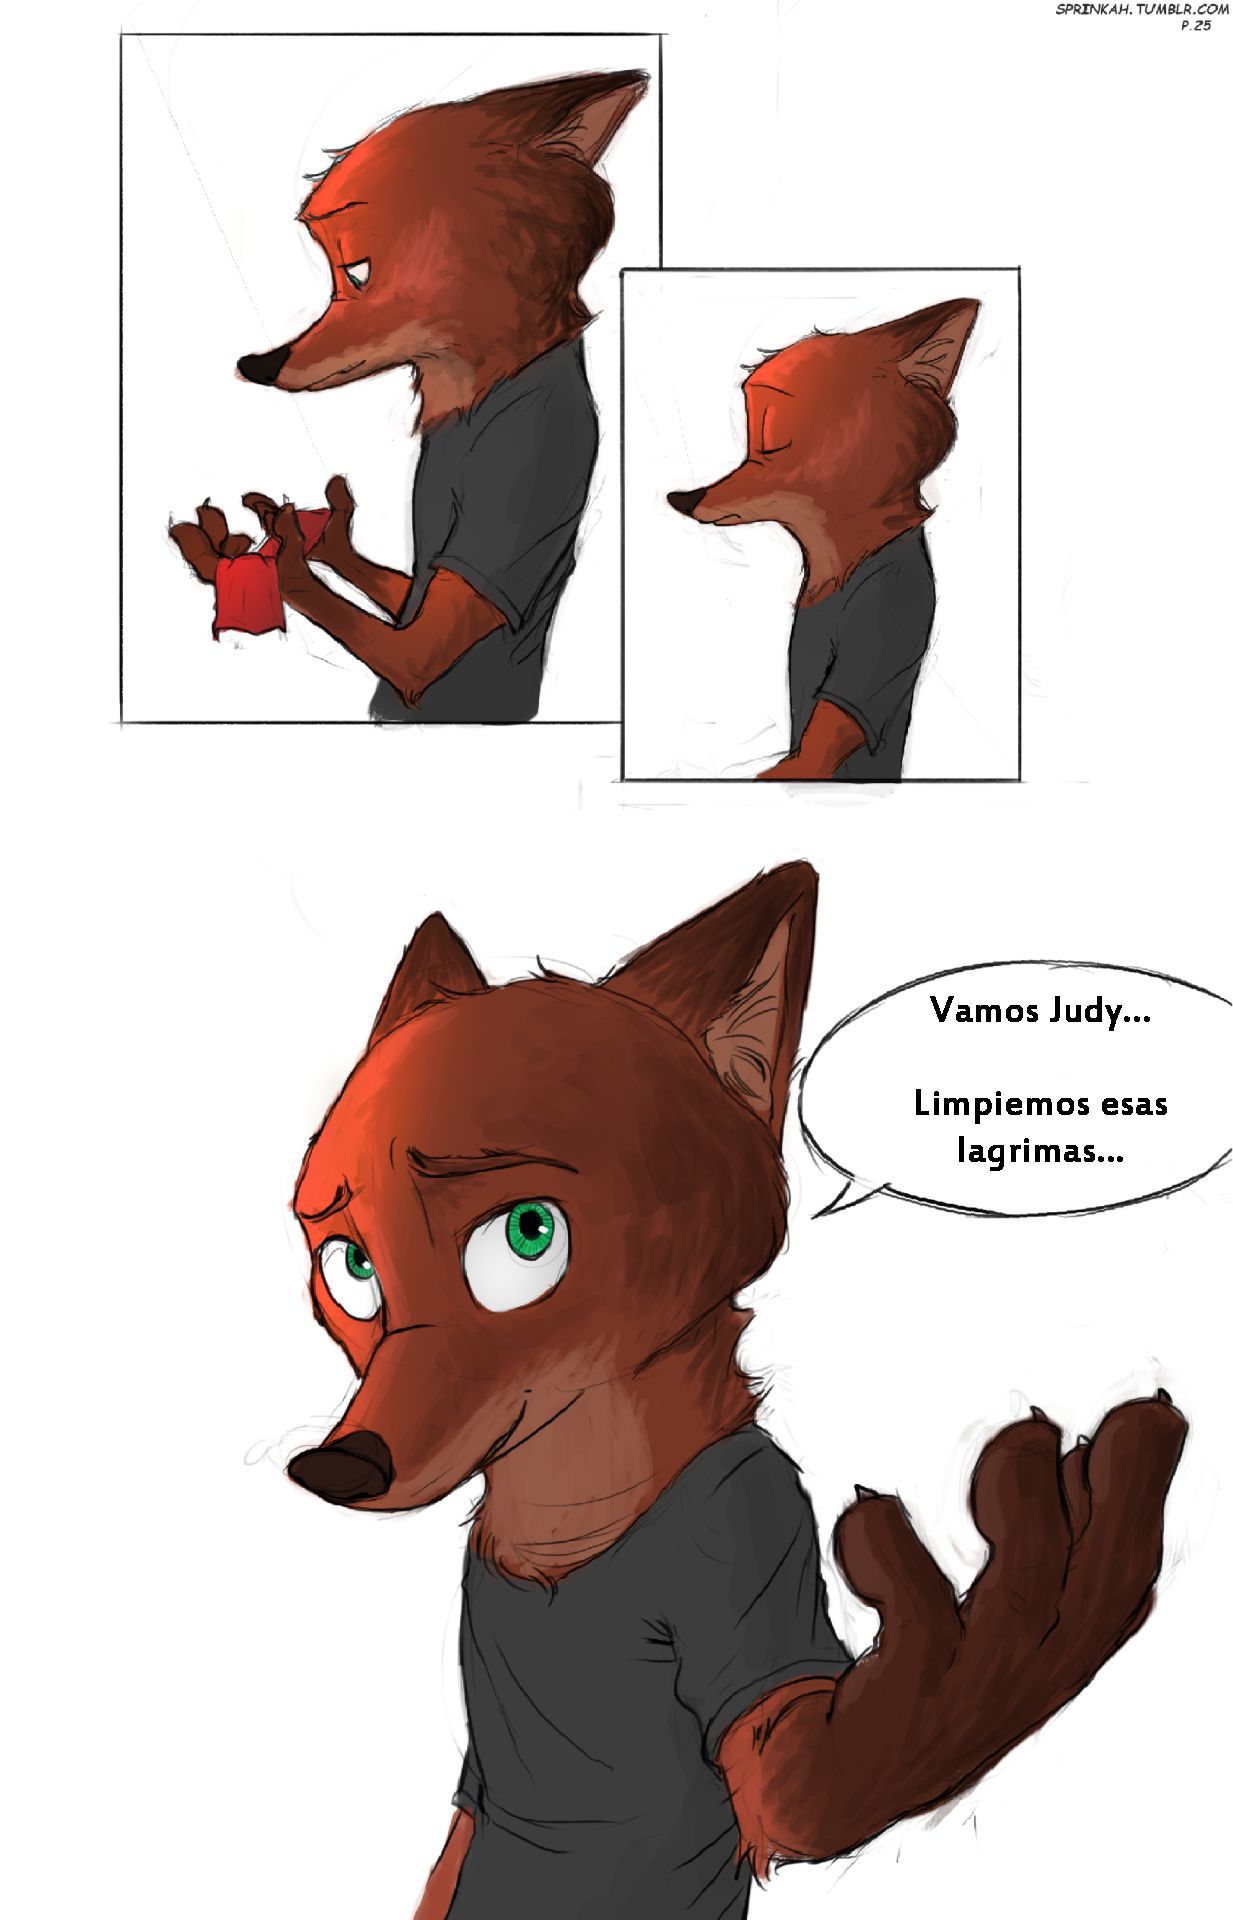 [Sprinkah] This is what true love looks like (Zootopia) (Spanish) (On Going) [Landsec] http://sprinkah.tumblr.com/ 37